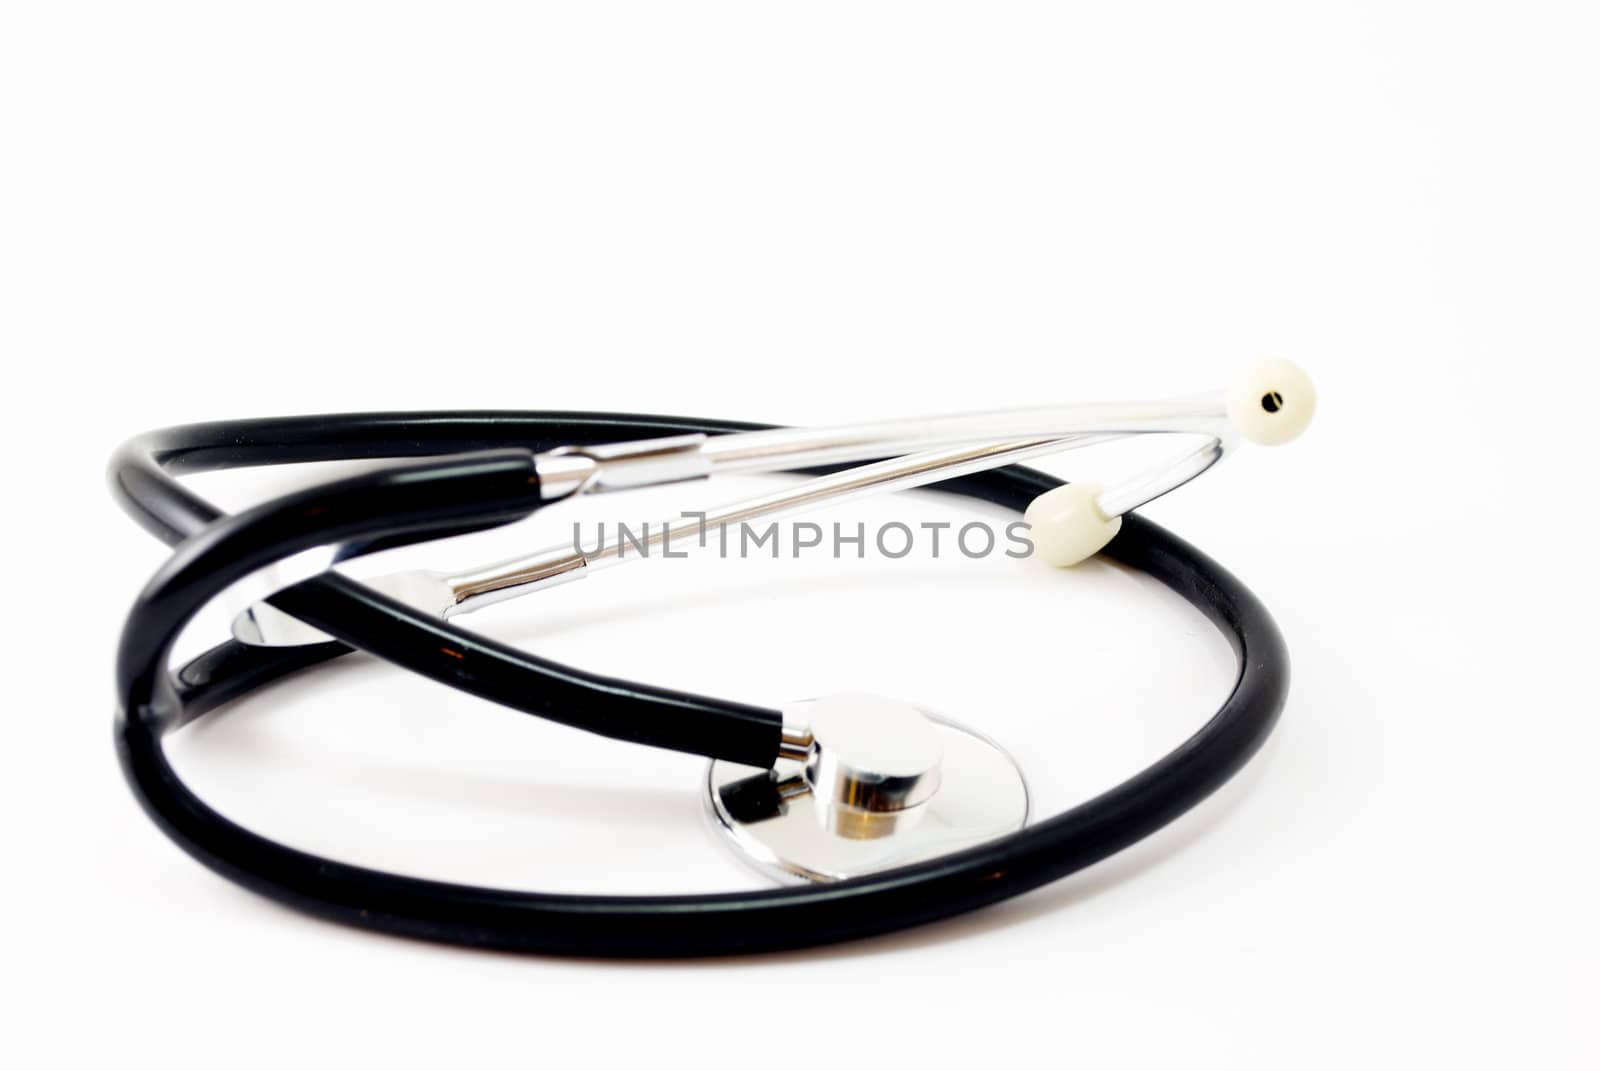 therapeutic stethoscope  on a white background